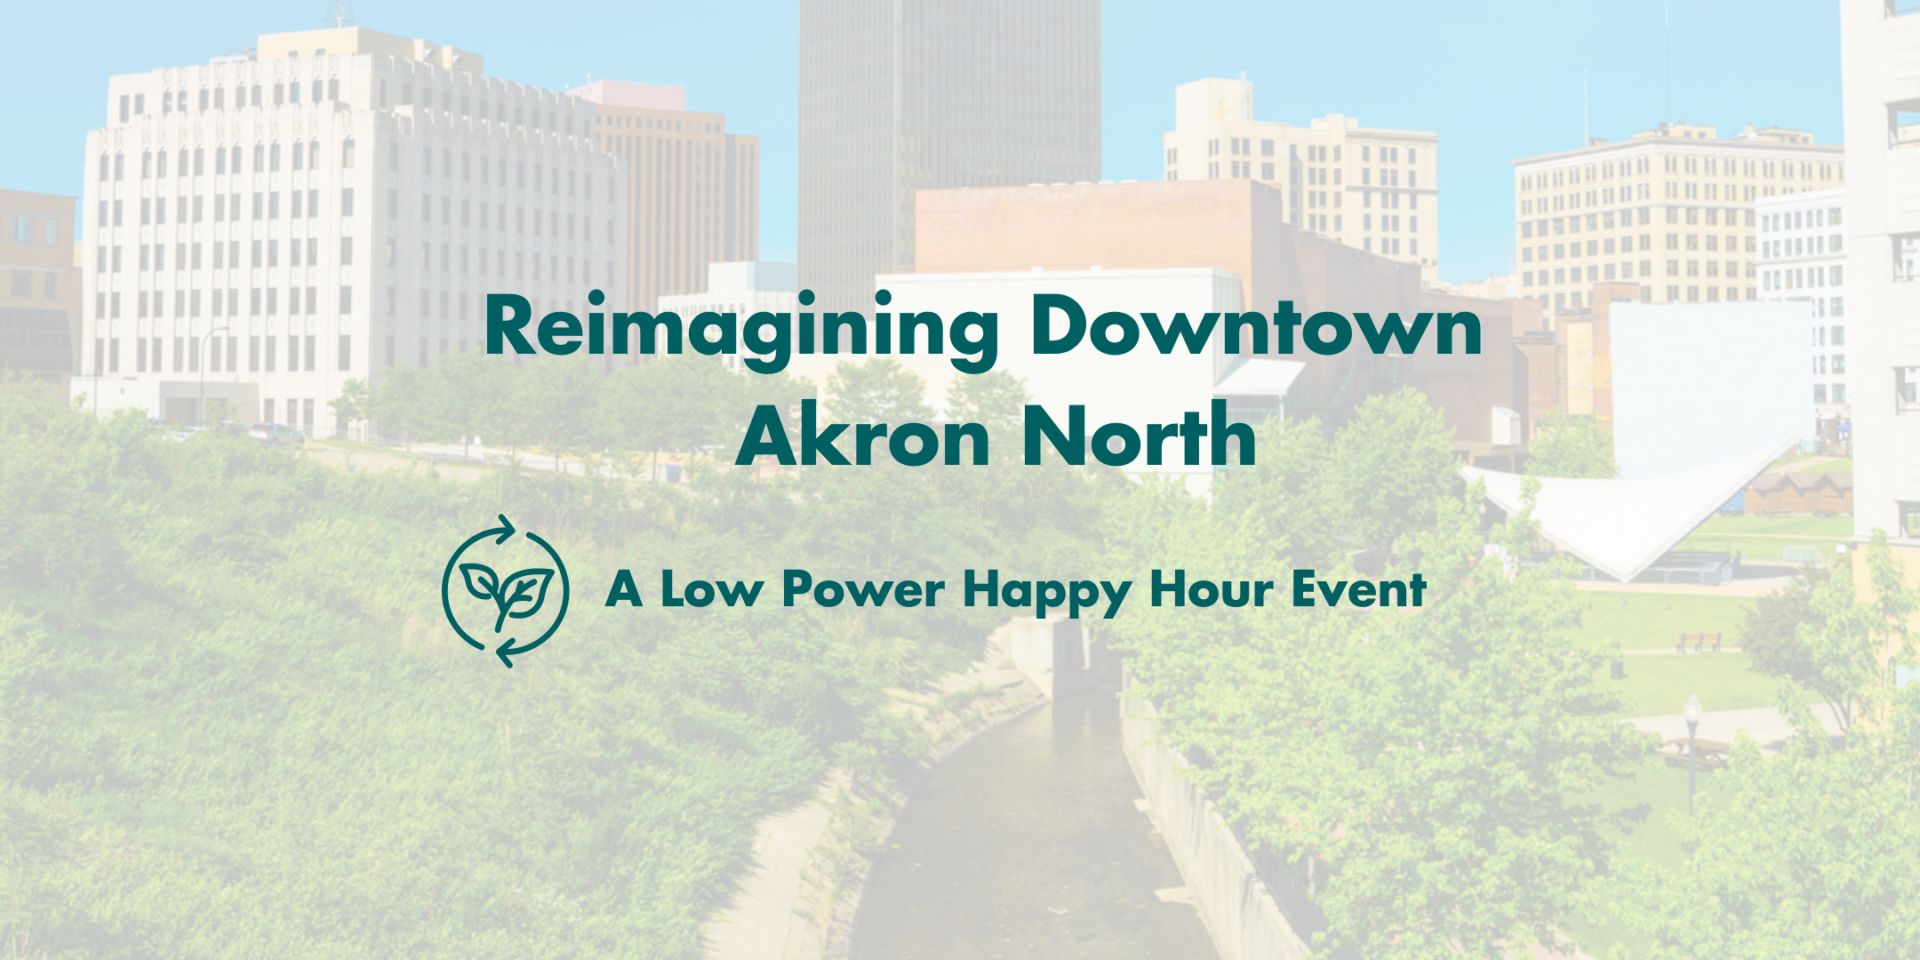 A scene of downtown Akron, Ohio showing multiple buildings and trees. The words Reimagining Downtown Akron North and A Low Power Happy Hour Event are centered in the middle of the graphic.